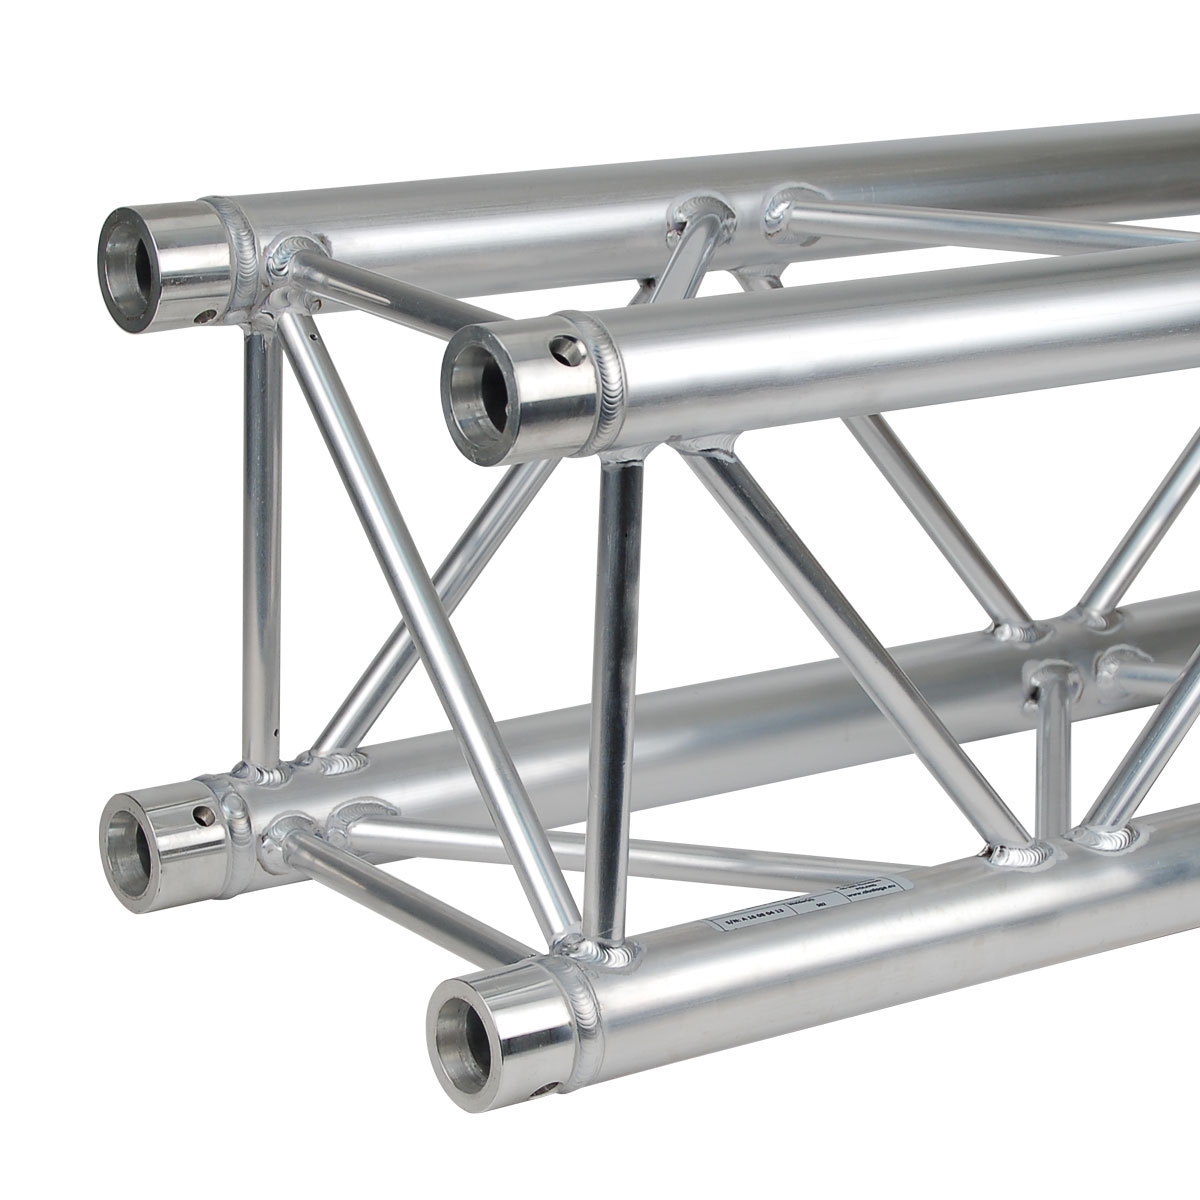 Square aluminium truss - Heavy duty - 290mm - Length 300cm - <strong>Connection kit included</strong>